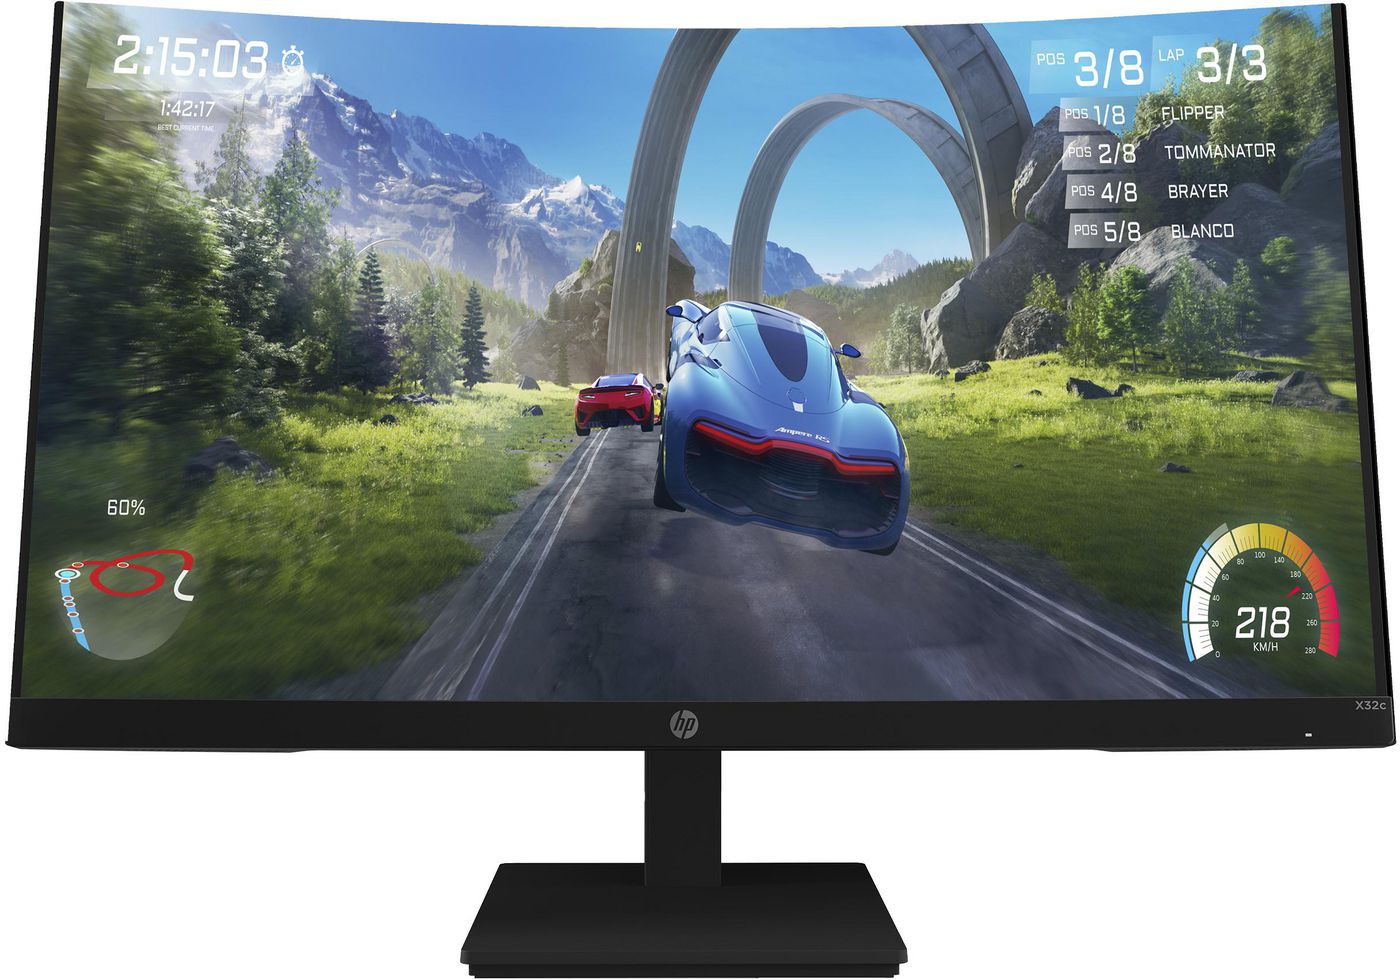 Gaming Monitor - X32c - 32in - 1920x1080 (FHD)